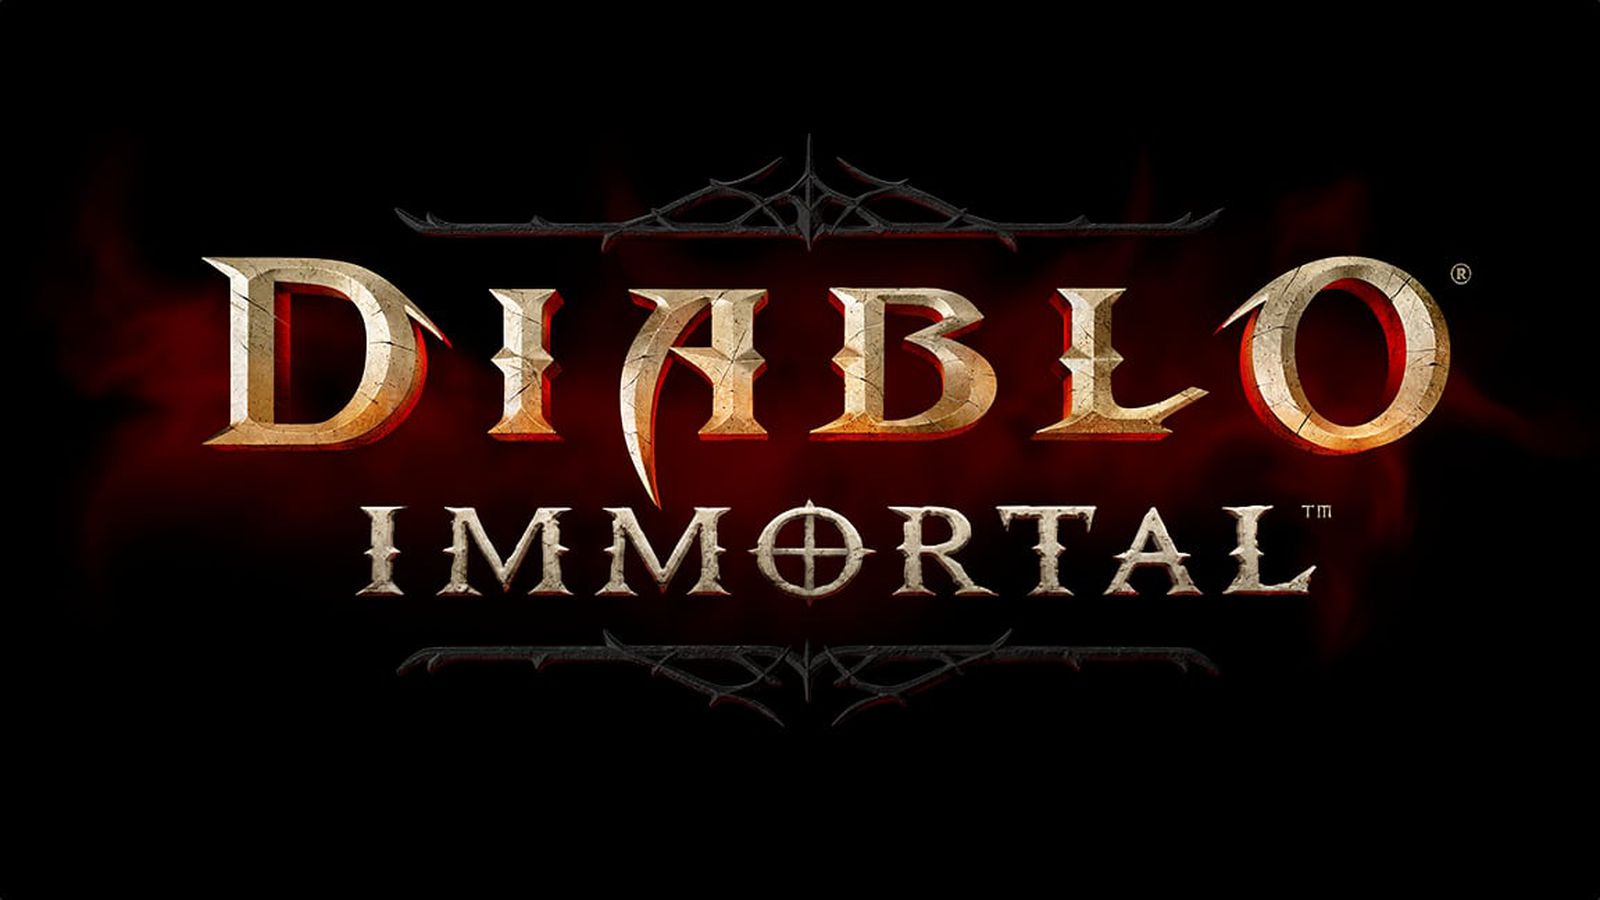 Blizzard's Free-to-Play 'Diablo Immortal' Game Launching on iOS on June 2